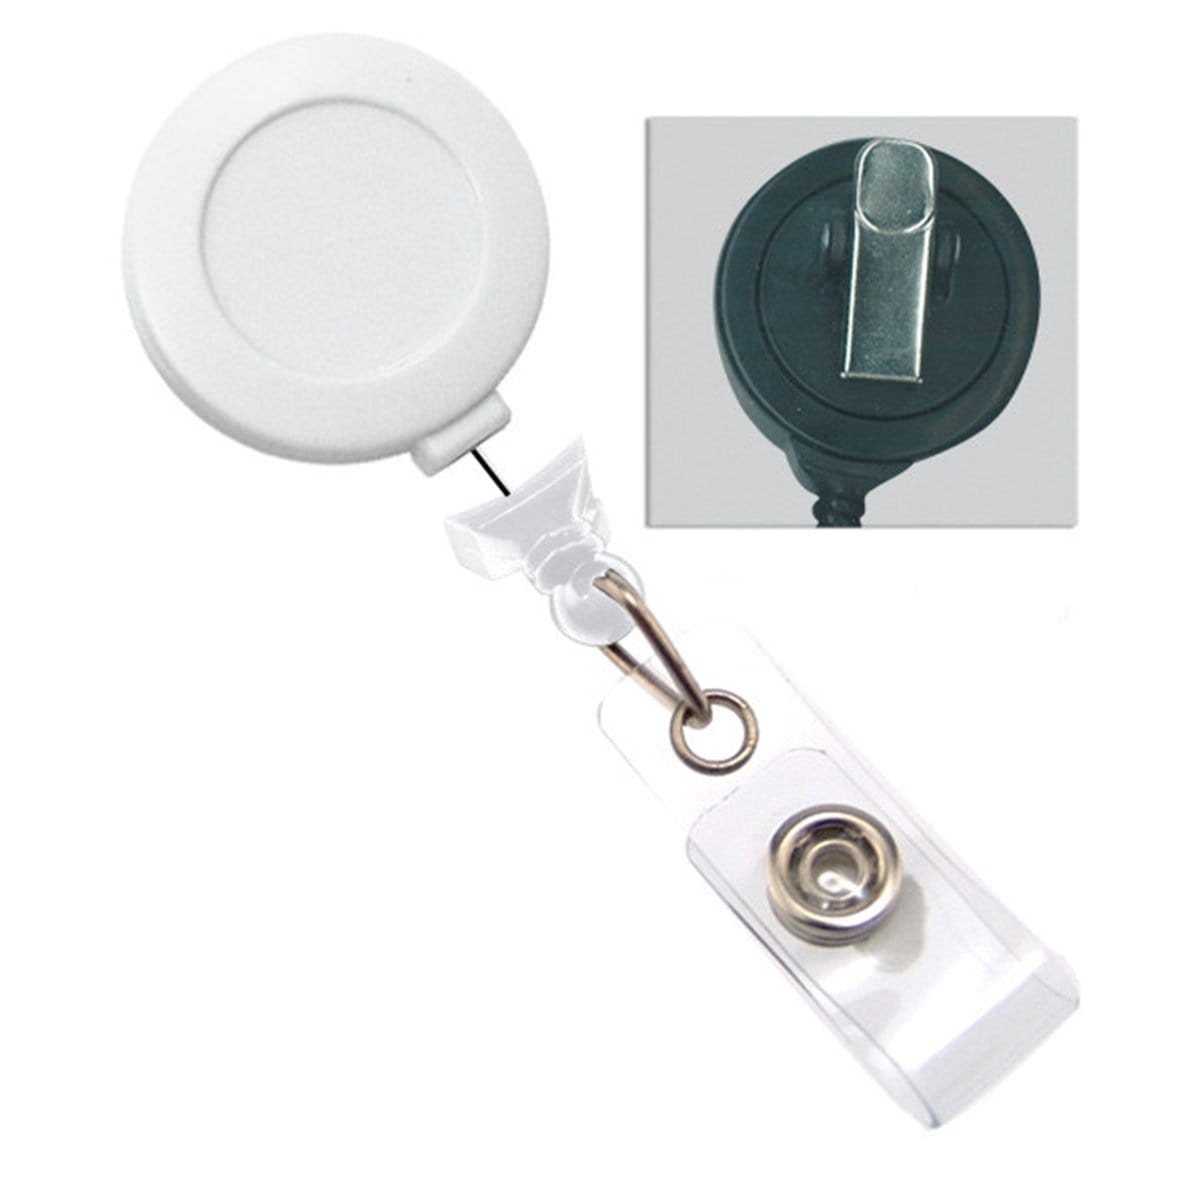 No Twist Badge Reel with A Swivel Spring Clip (p/n 2120-764X)